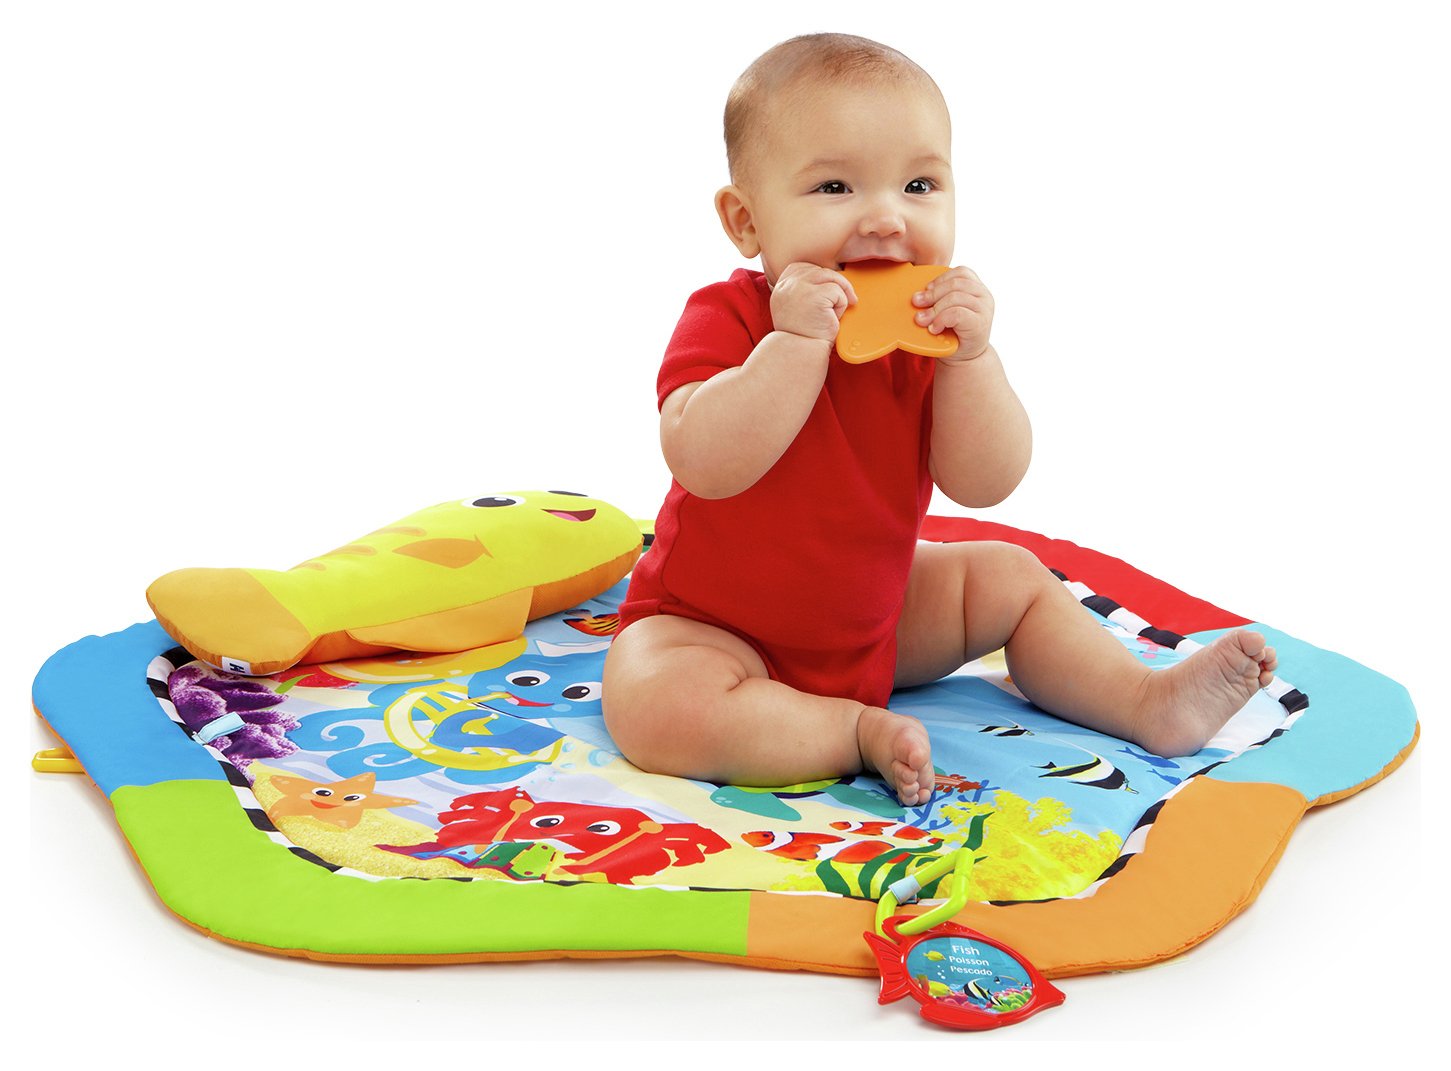 Baby Einstein Rhythm of the Reef Gym with Lights and Sounds Review